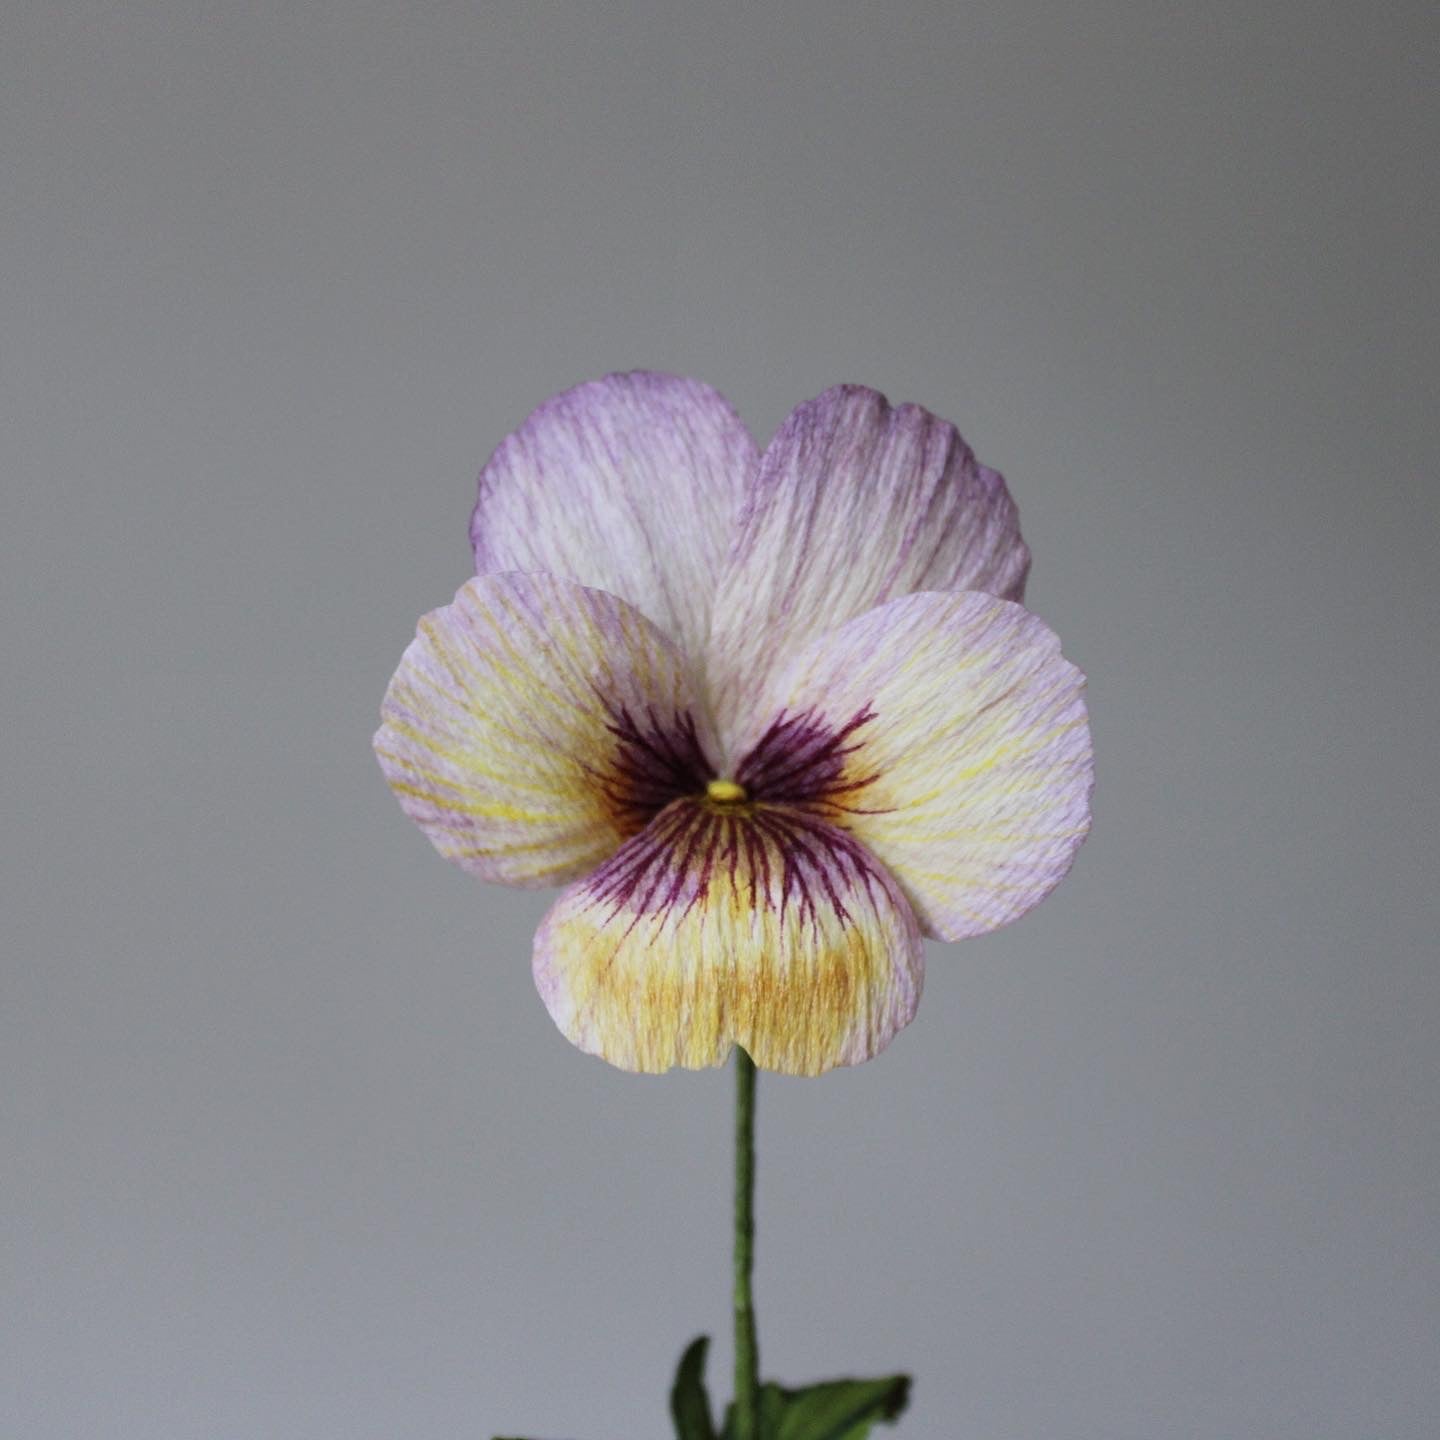 Pansy easy practice course on 28 January 